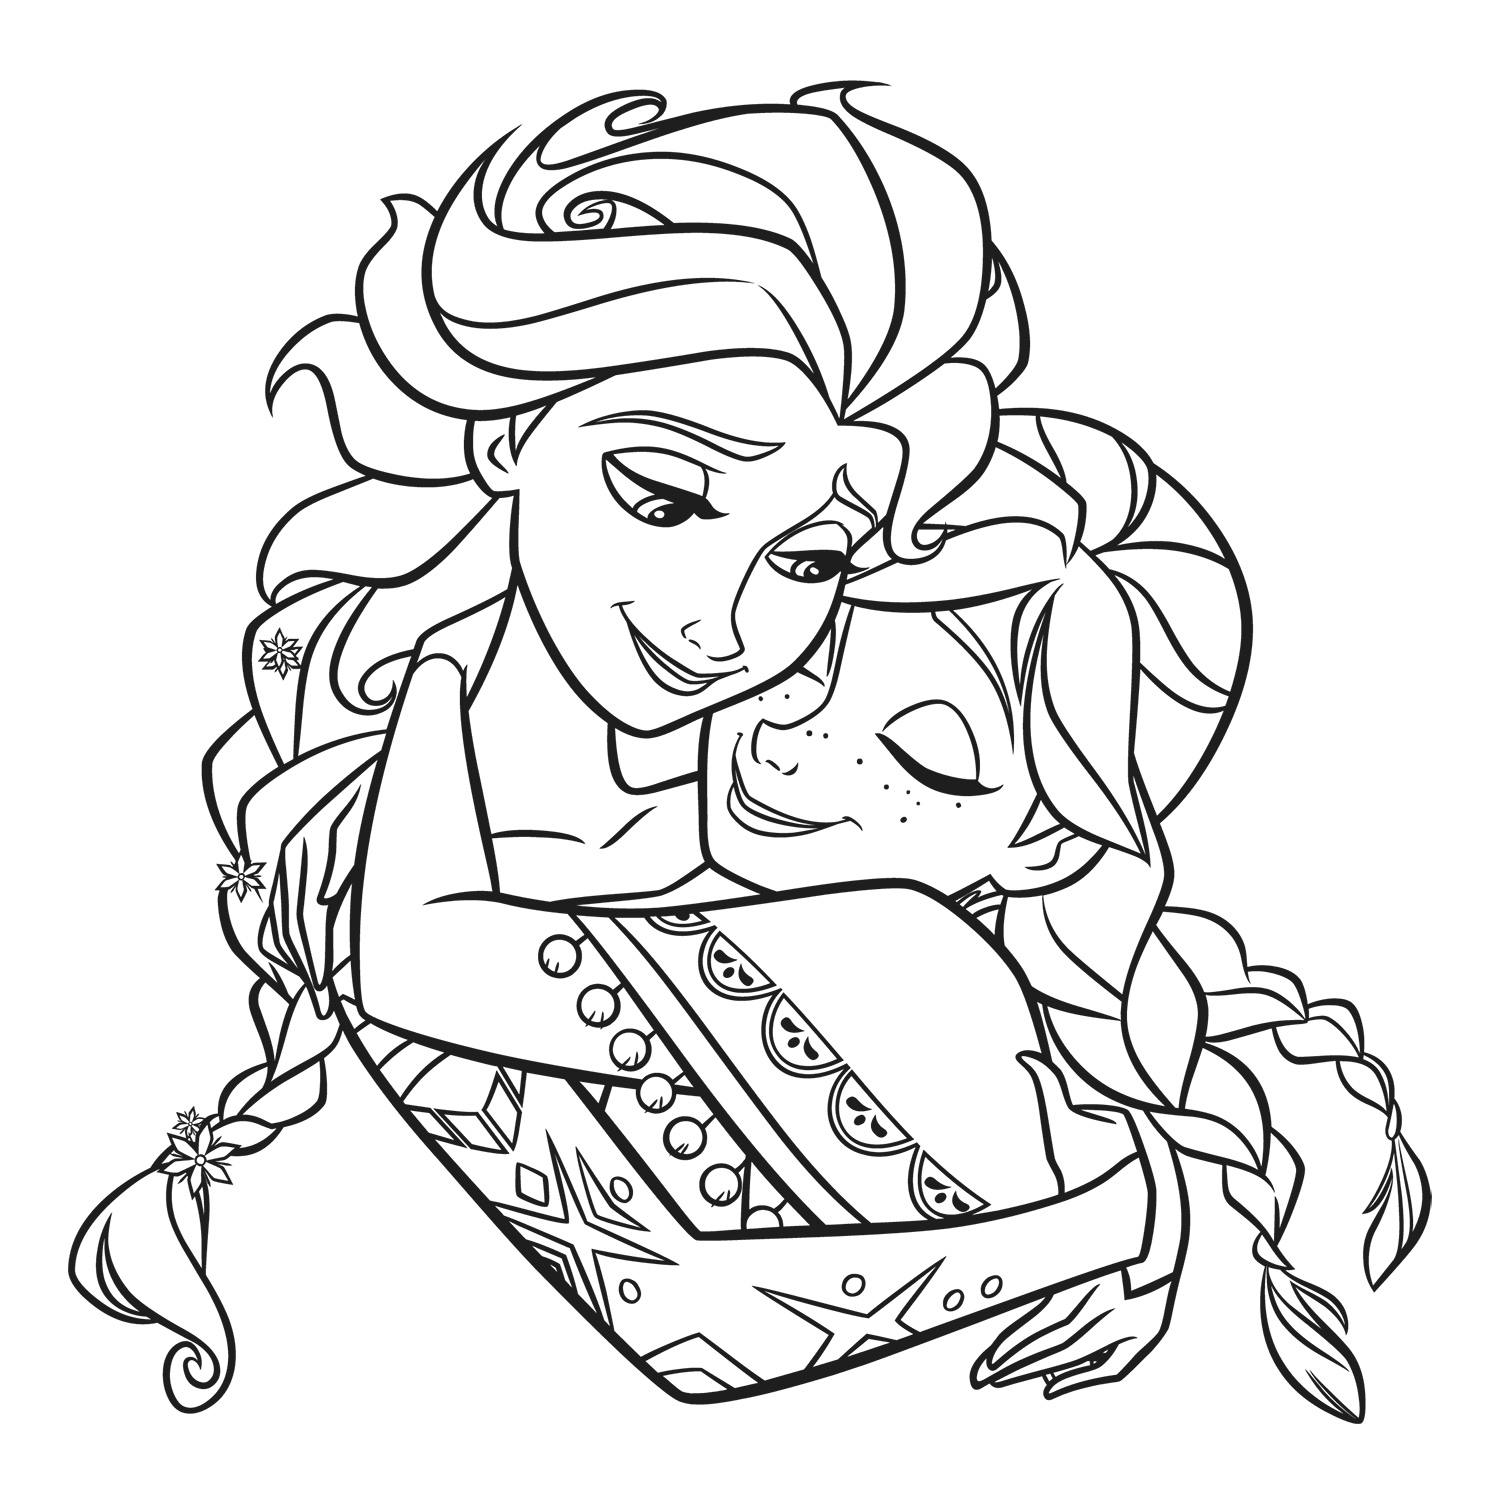 elsa-and-anna-coloring-pages-to-download-and-print-for-free